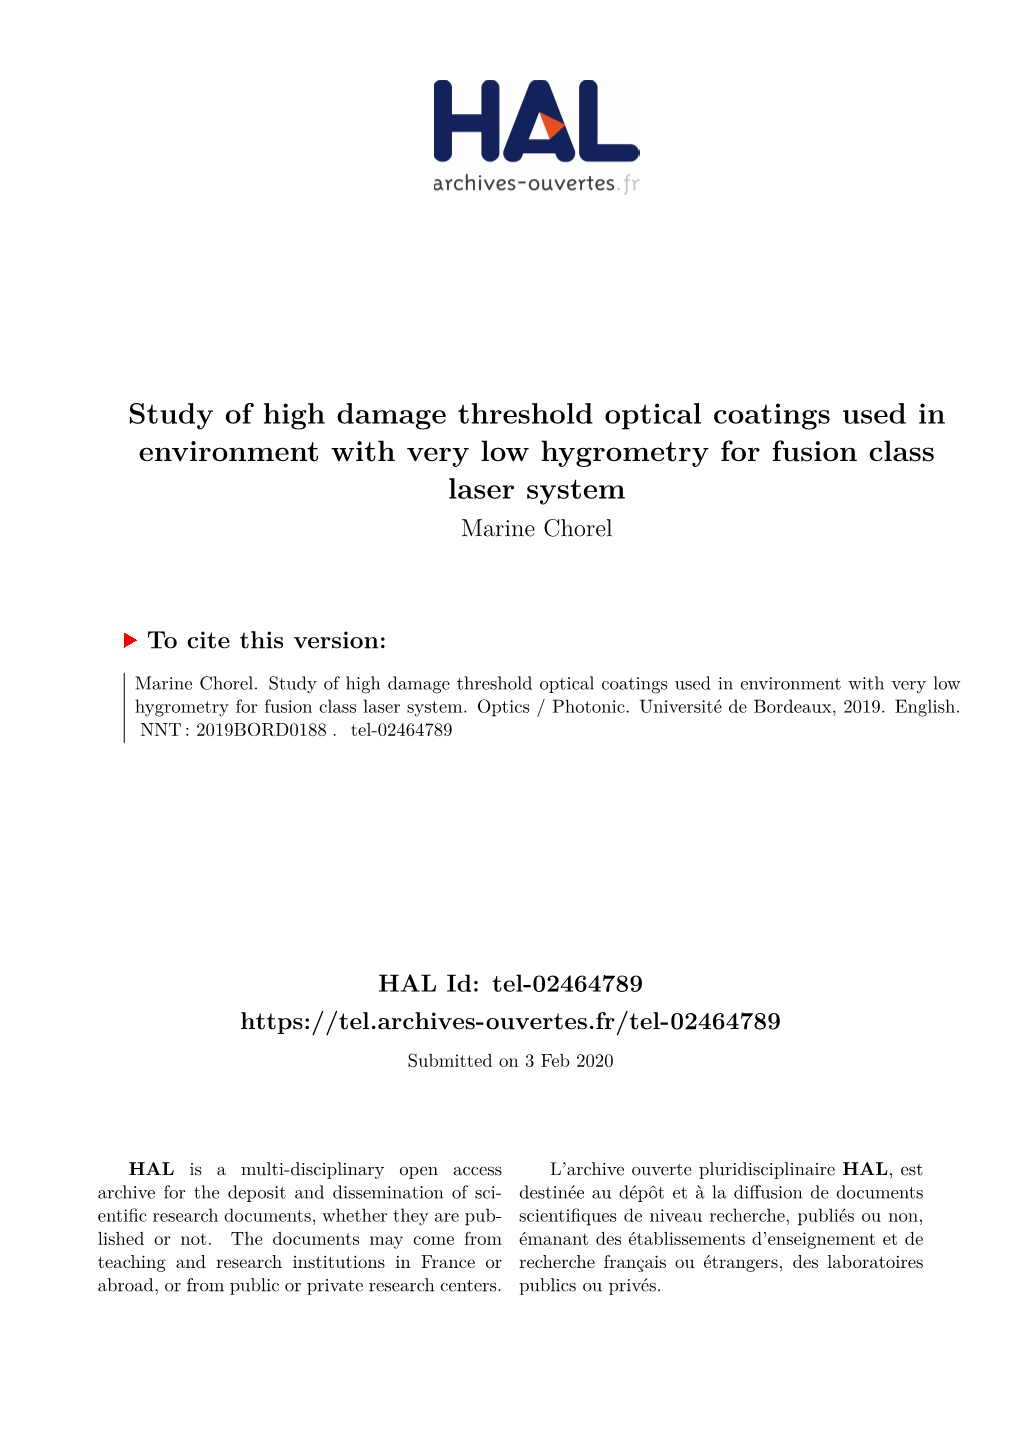 Study of High Damage Threshold Optical Coatings Used in Environment with Very Low Hygrometry for Fusion Class Laser System Marine Chorel